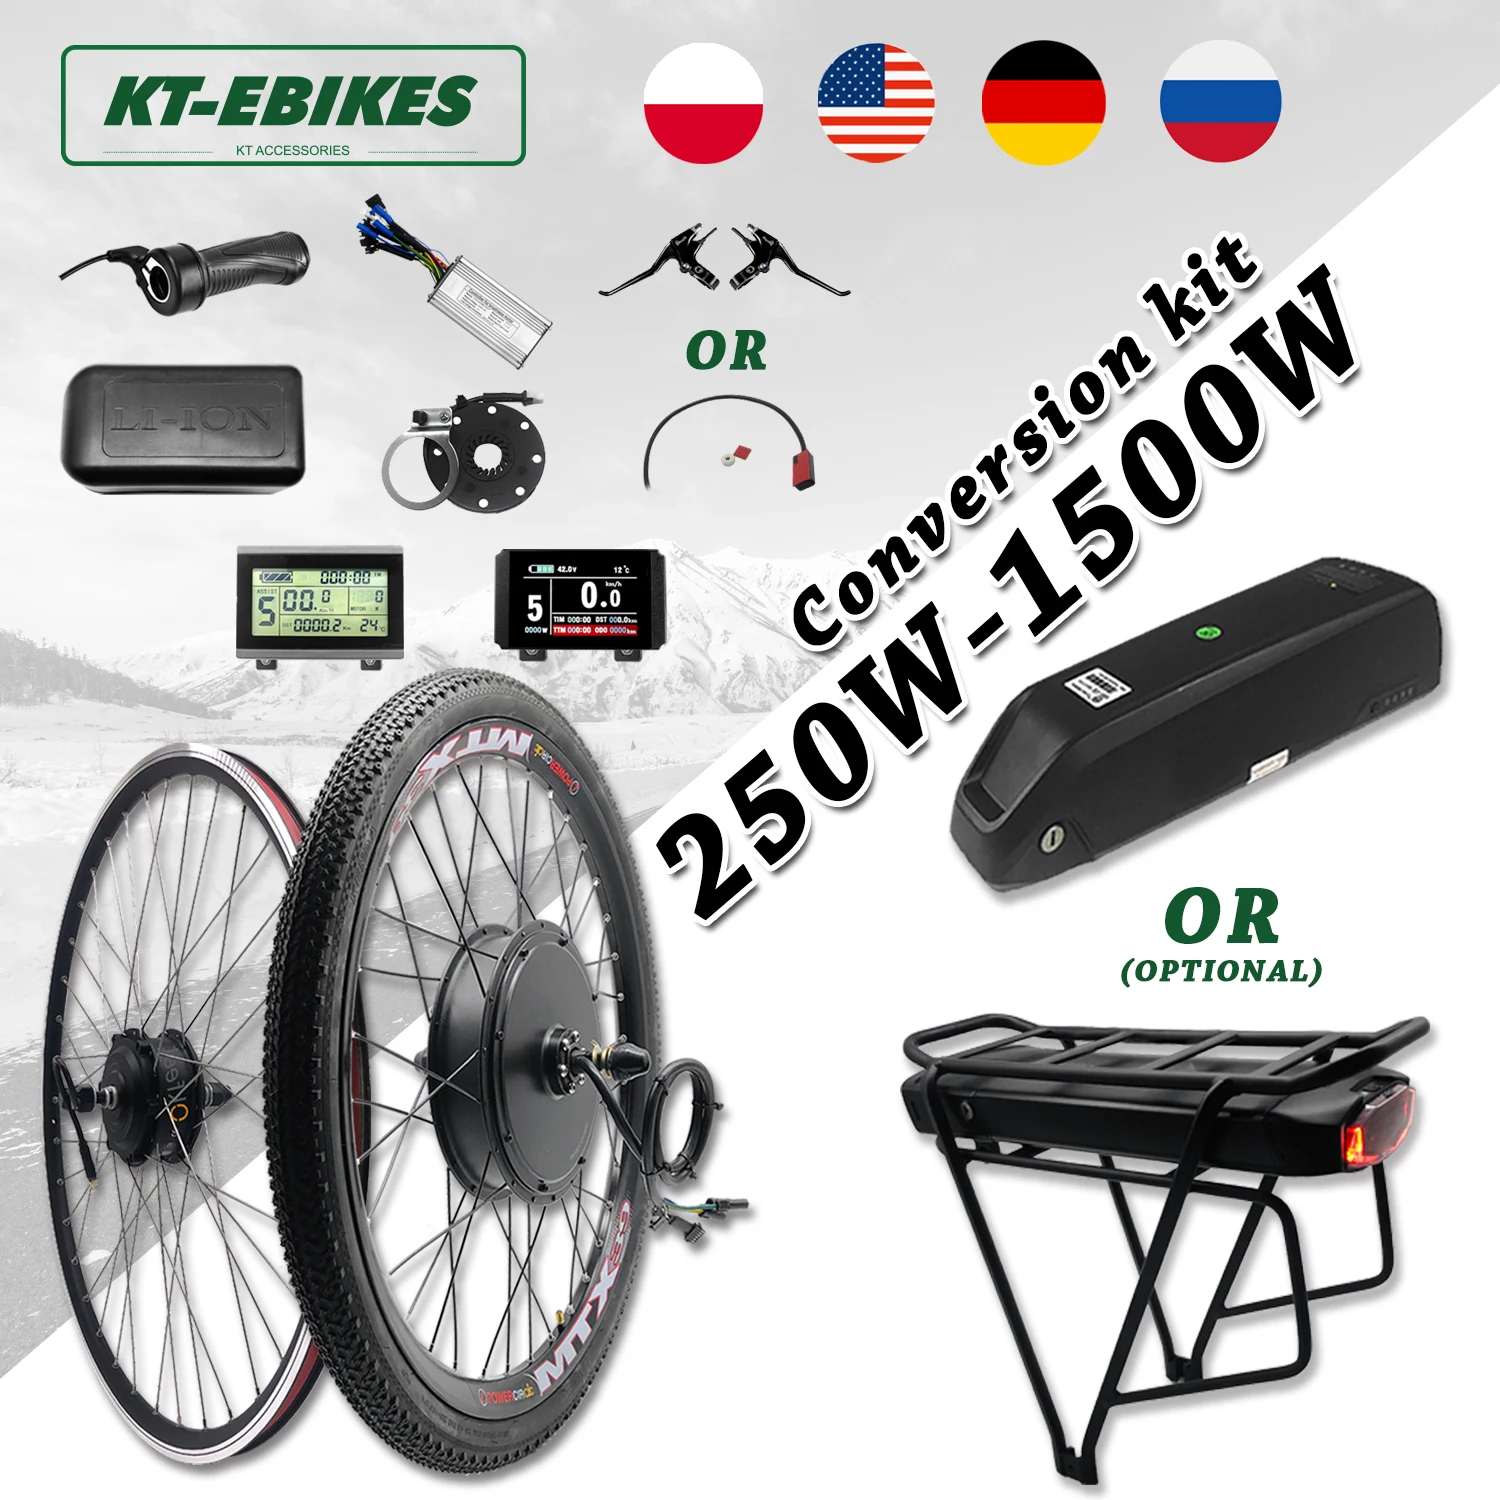 

eBike Kit 36V 500W 48V 750W 1000W 1500W Front Rear e-bike Wheel Hub Motor Electric Bicycle Bike Conversion Kit with battery